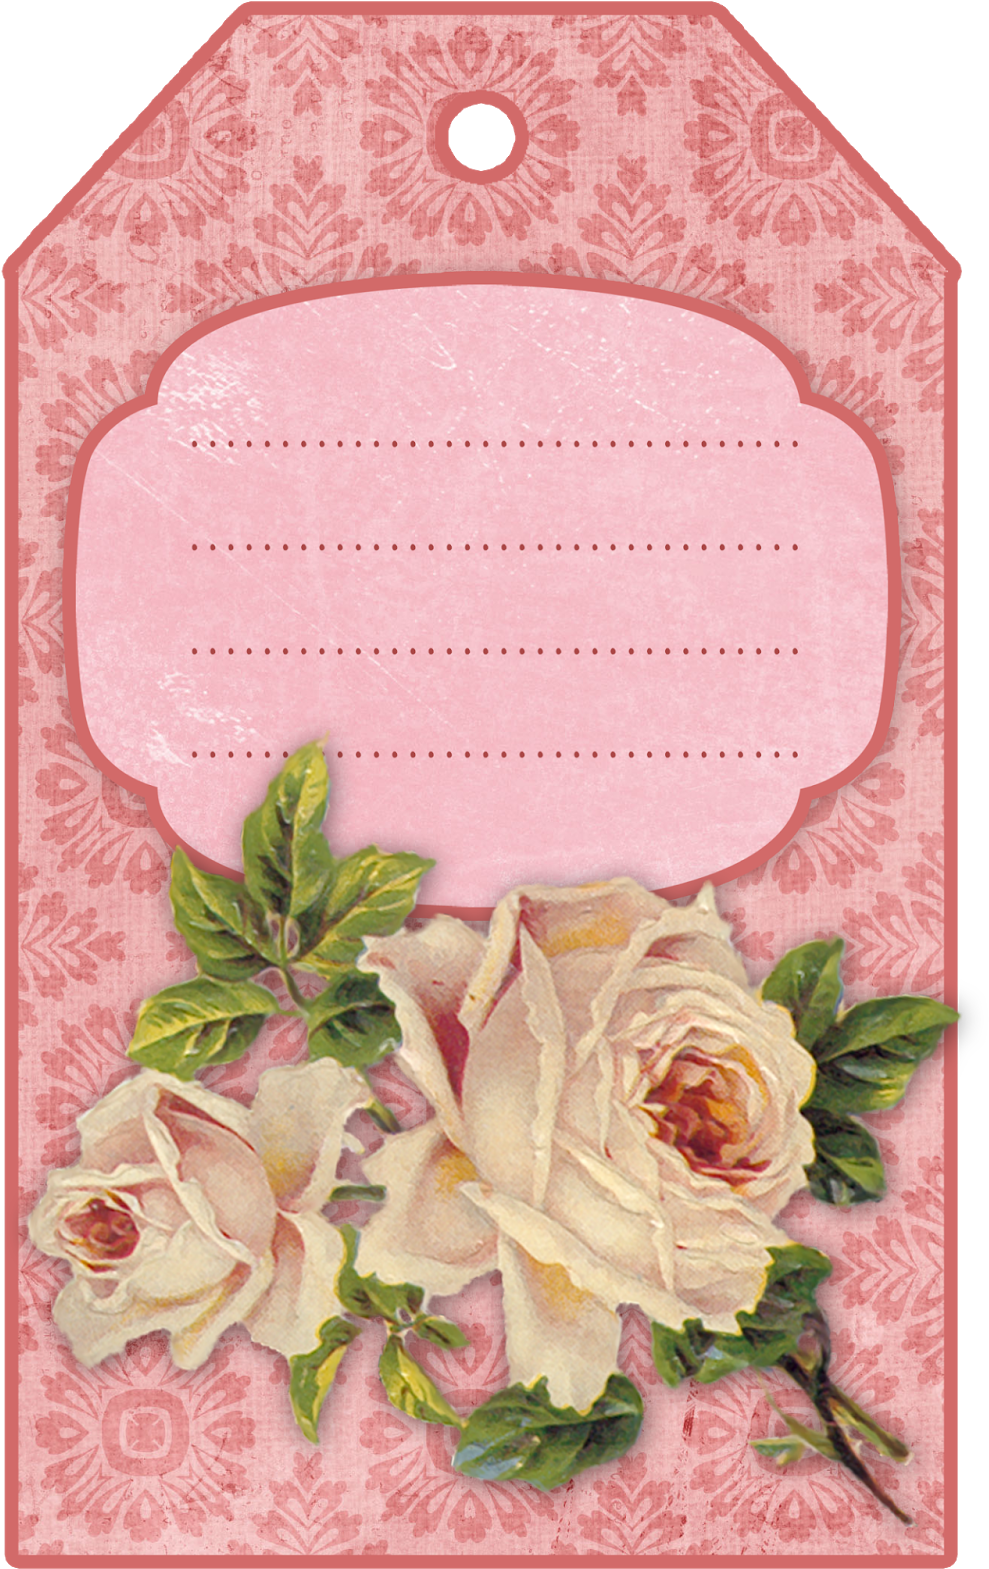 A Pink And White Floral Card